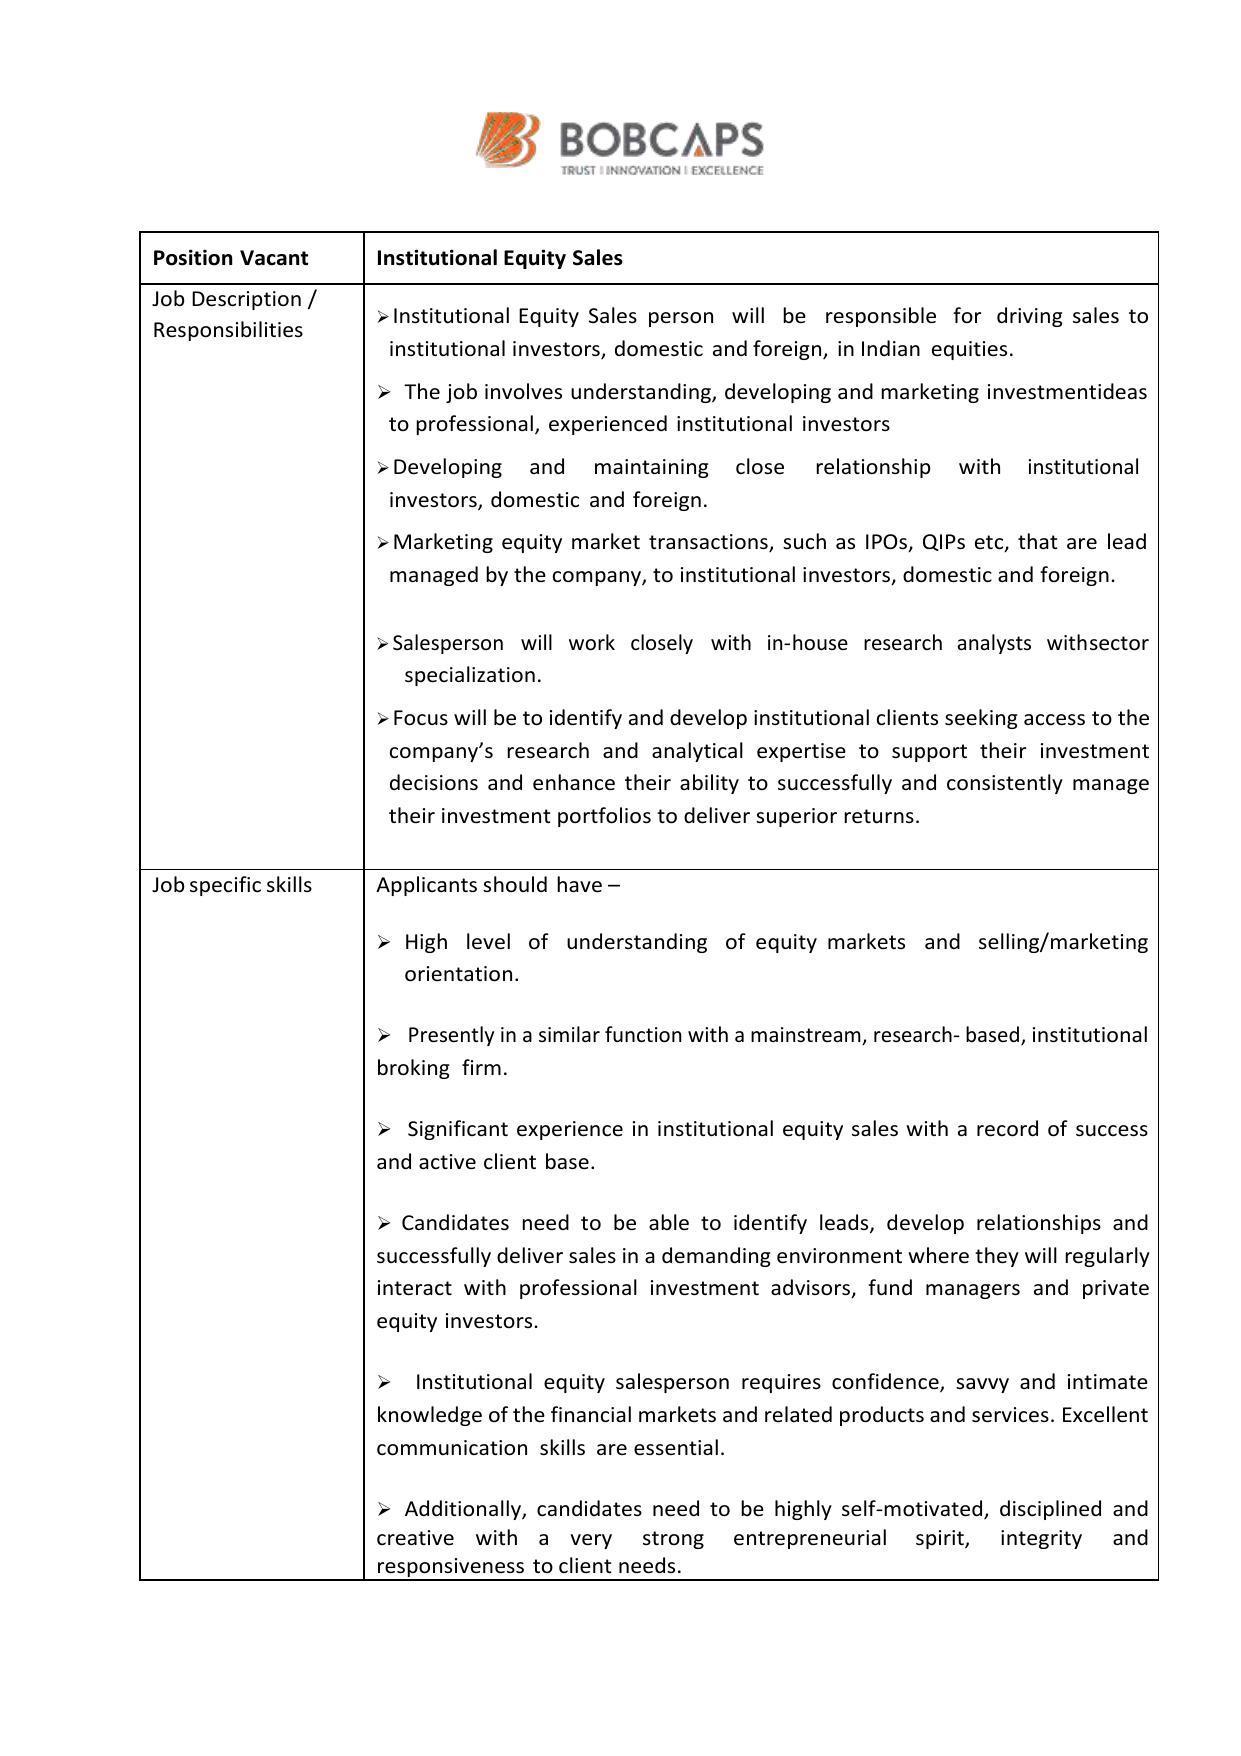 BOB Capital Markets Invites Application for Institutional Equity Sales Recruitment 2022 - Page 2